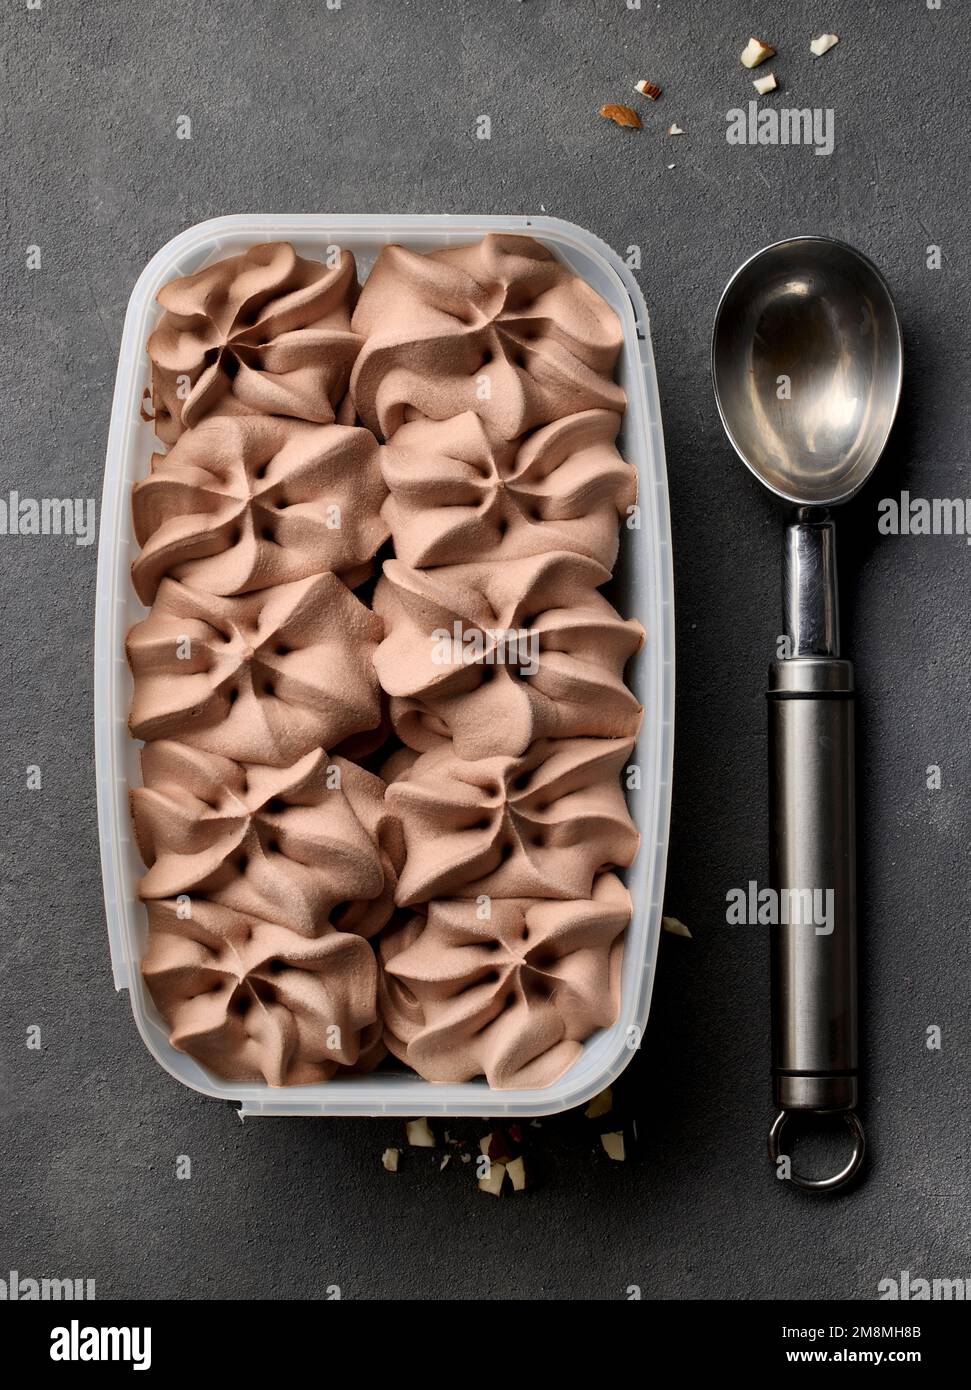 https://c8.alamy.com/comp/2M8MH8B/open-chocolate-ice-cream-package-on-grey-table-top-view-2M8MH8B.jpg